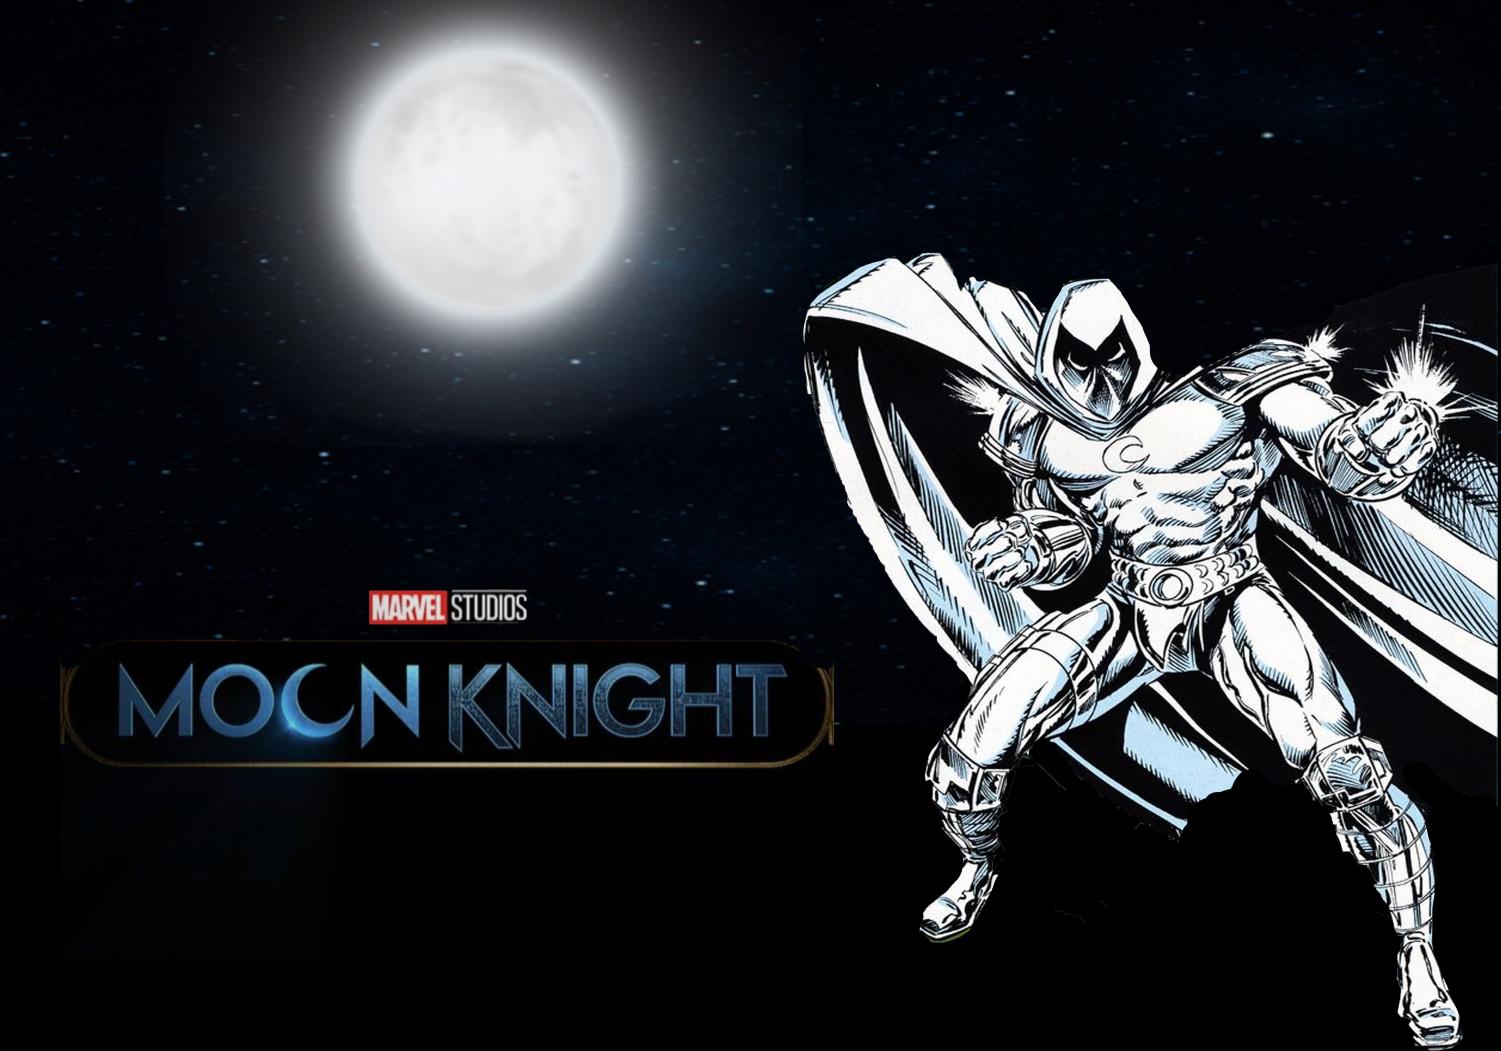 Marvel's Moon Knight Trailer For Disney+ Show Releases Monday